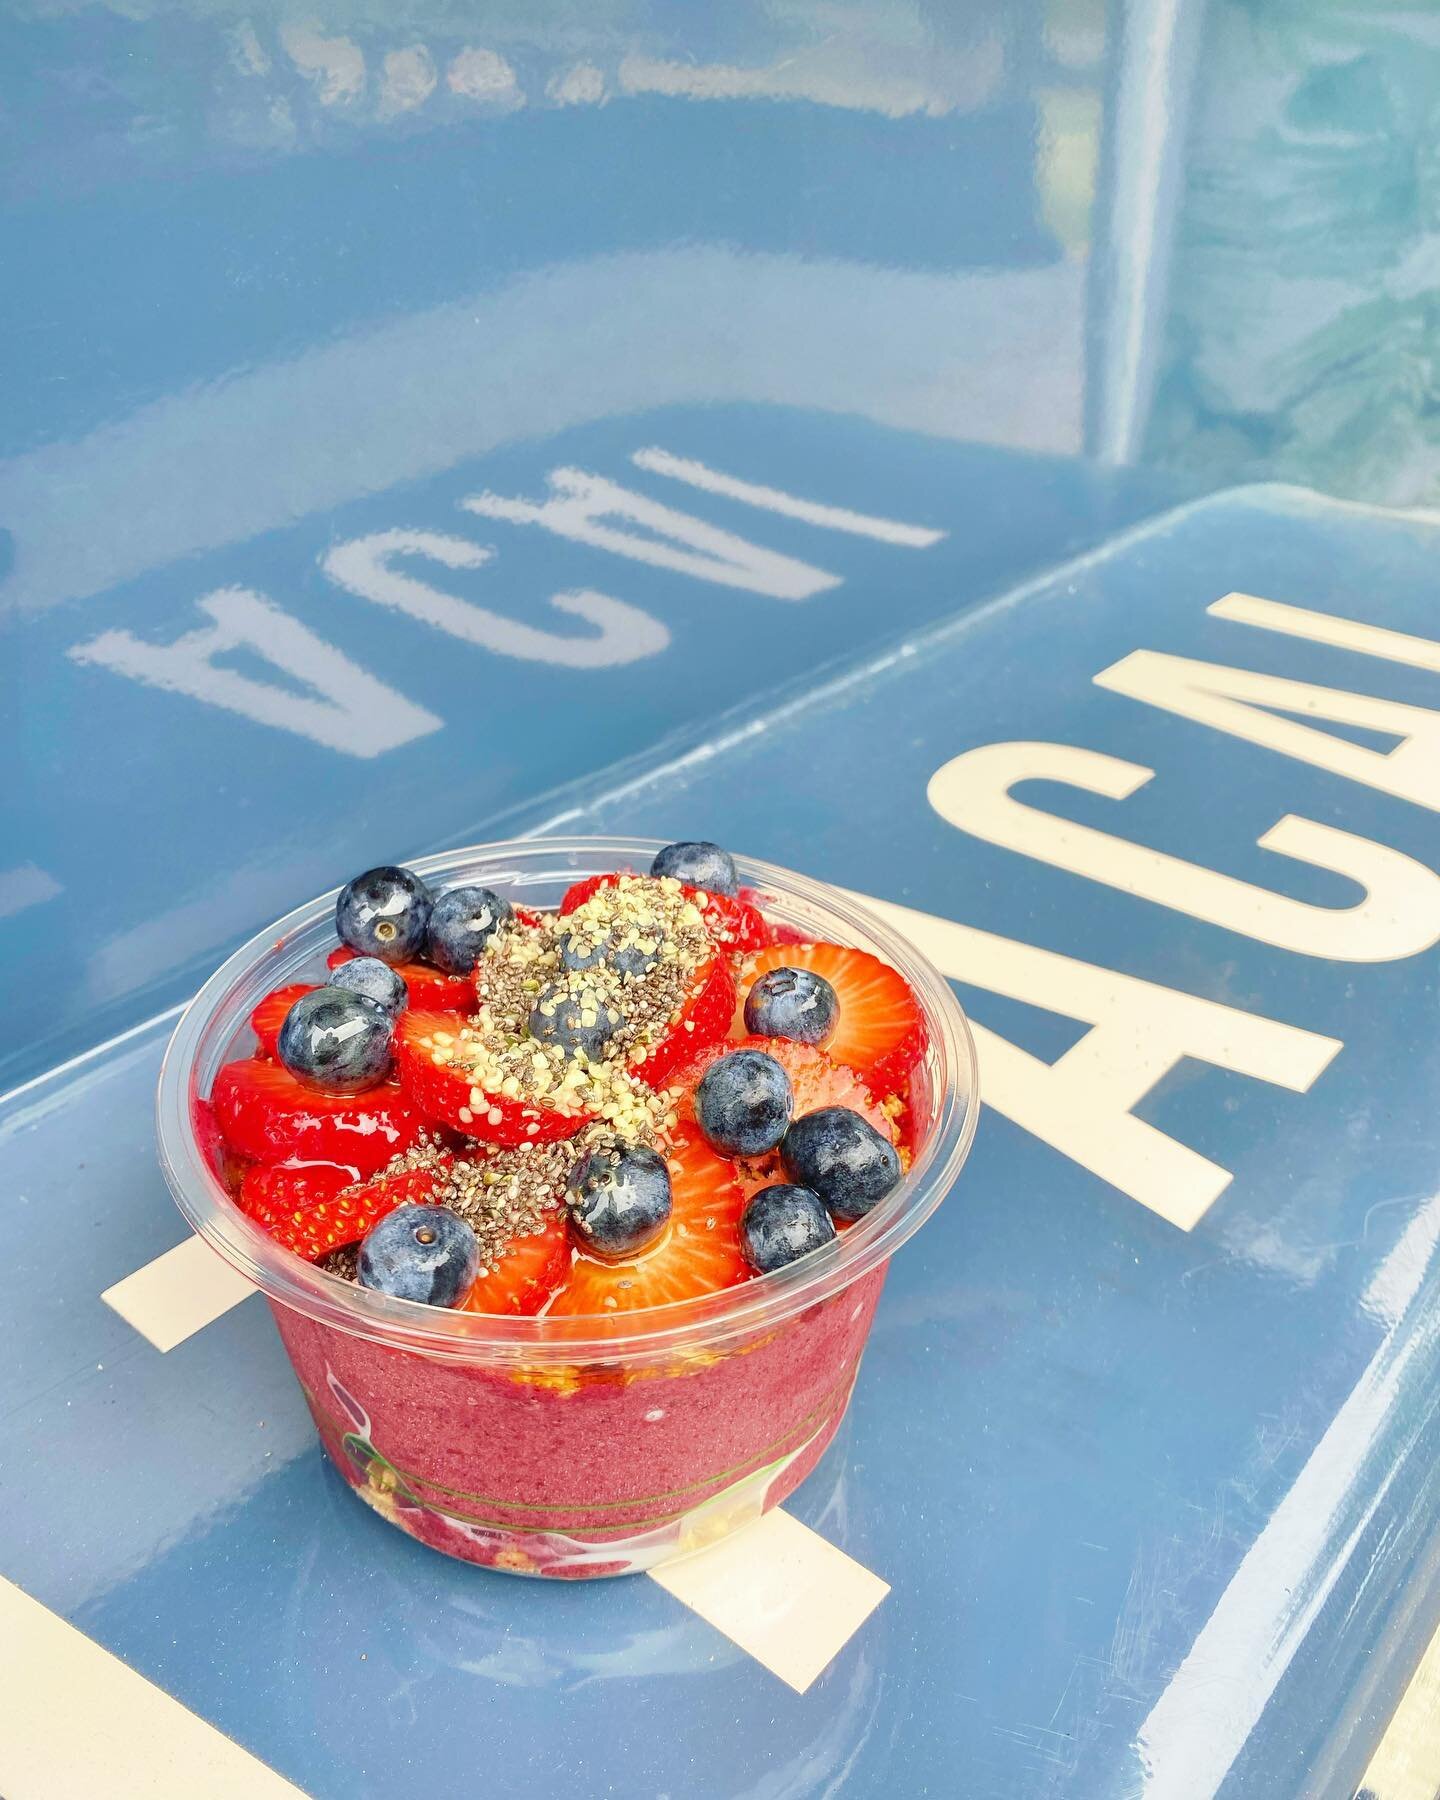 🌟 GIVEAWAY 🌟 

We are giving away an acai bowl or smoothie to 3 of you!! 

RULES: 
1. like this post
2. tag 3 friends
3. follow island girl acai on instagram 

For extra entries share on your story! Winner selected this Friday!